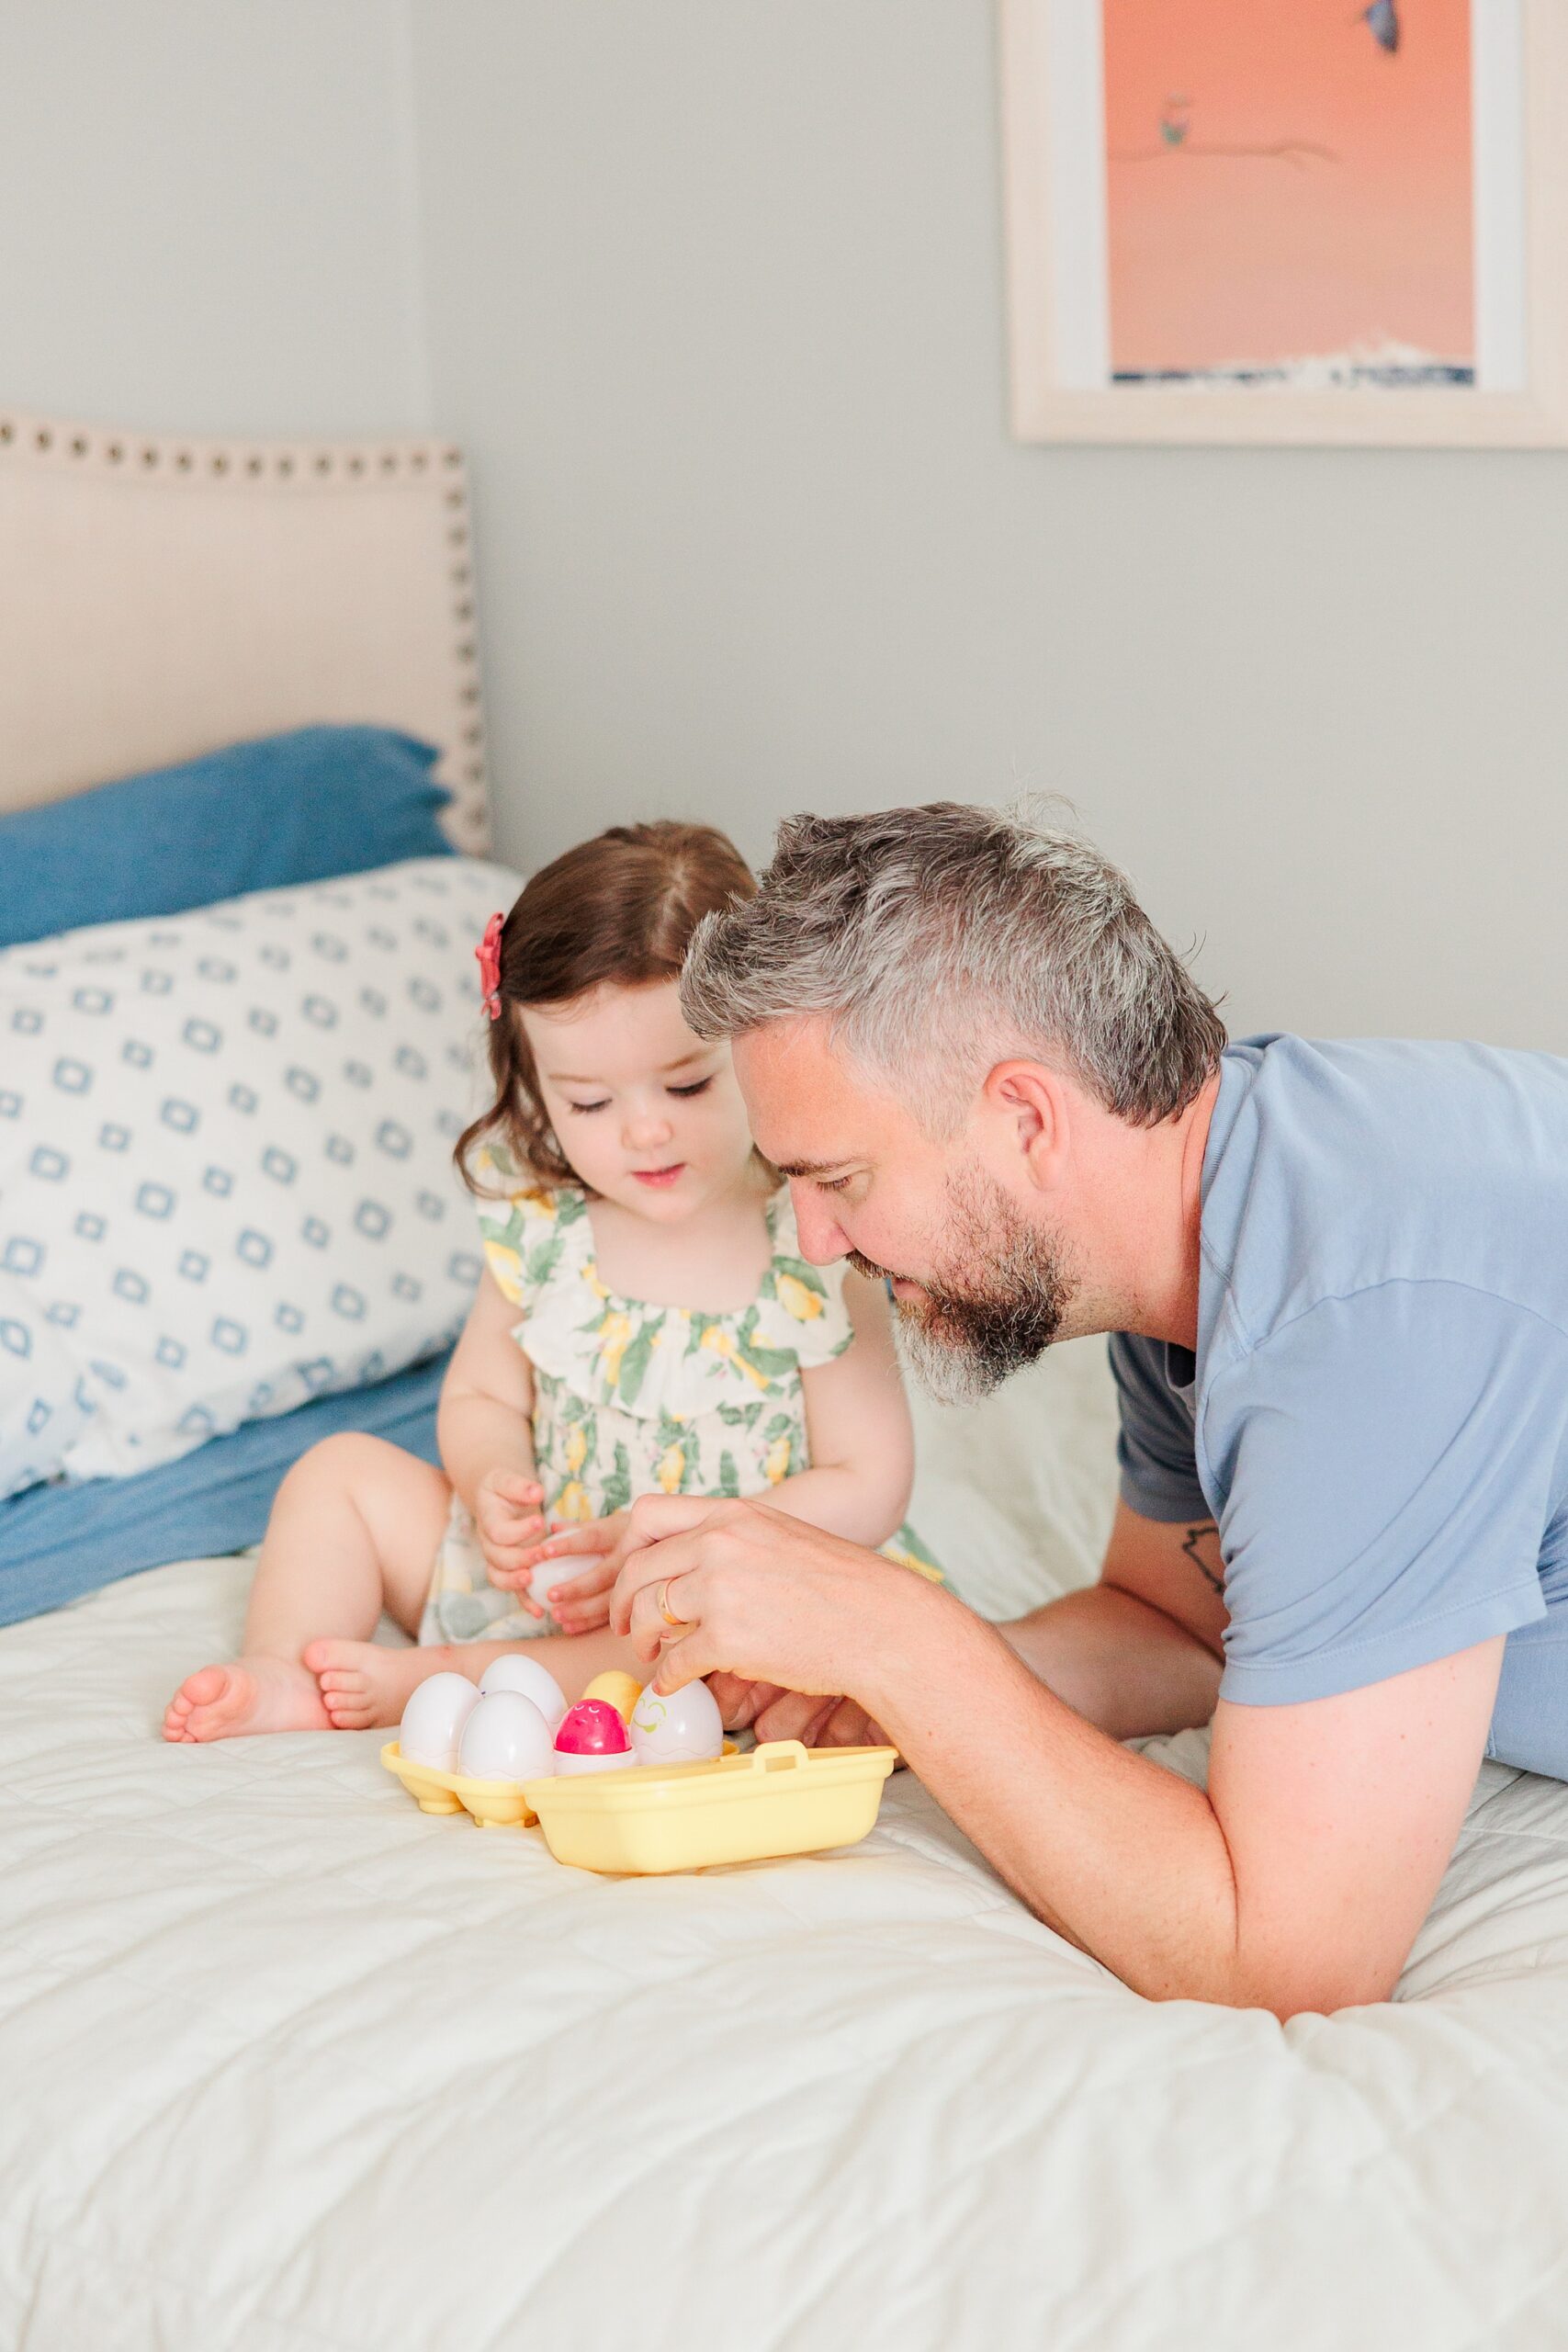 dad in blue shirt plays with daughter on bed during family photos at home